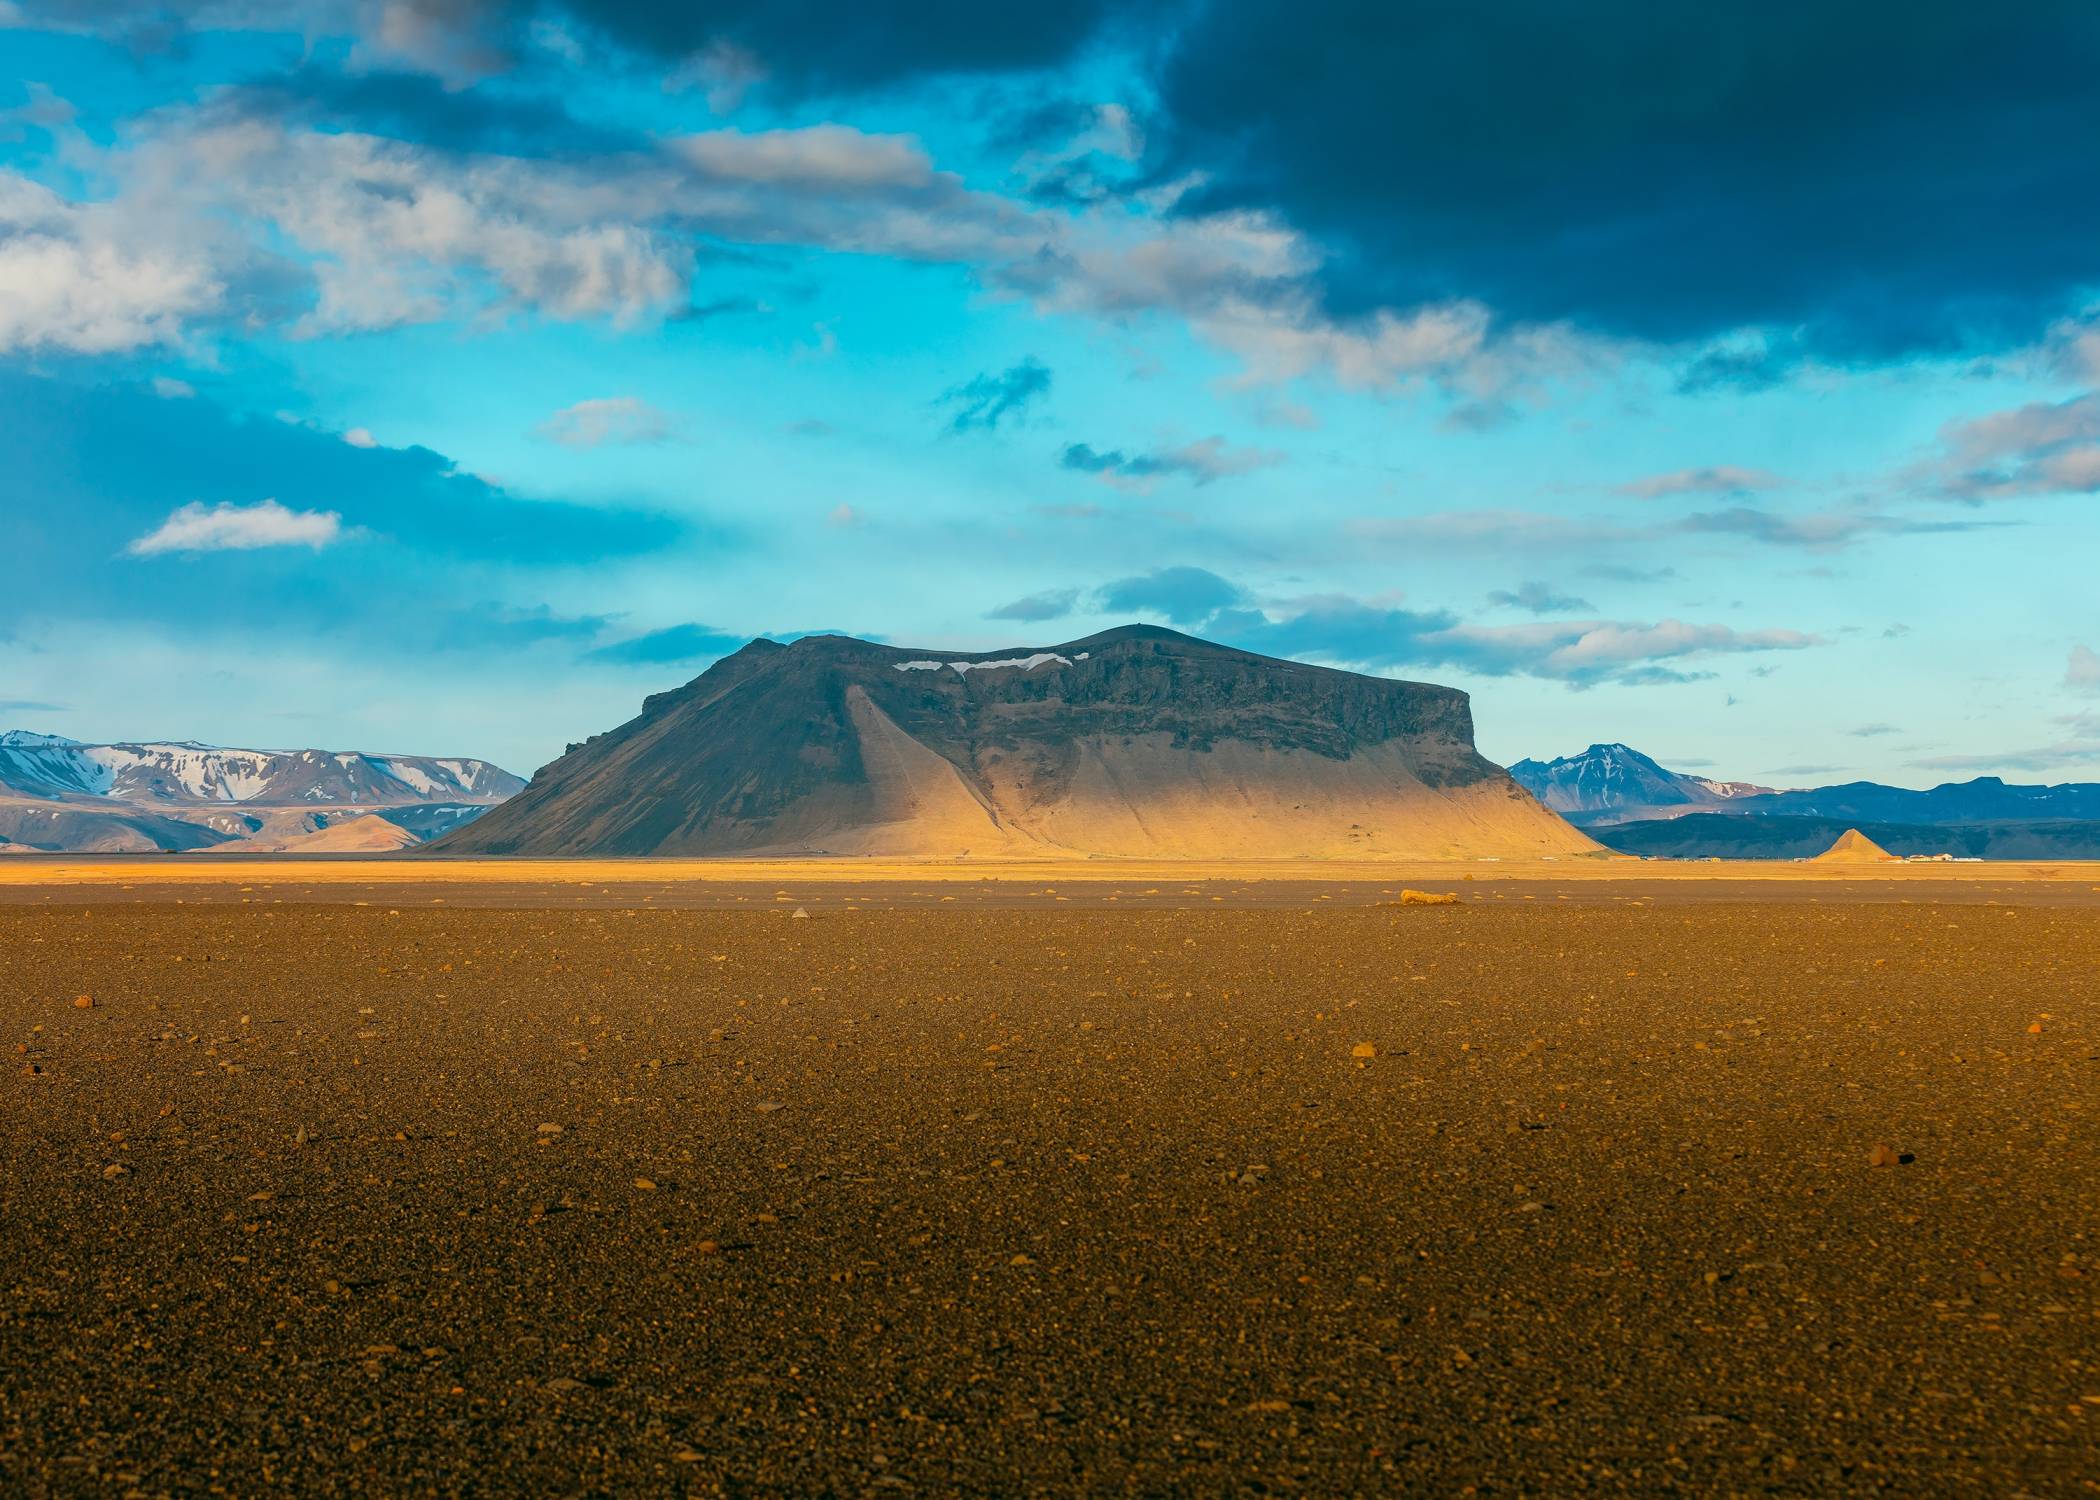 Sand-and-ash-protection-in-iceland-desert-land-and-mountains-in-iceland